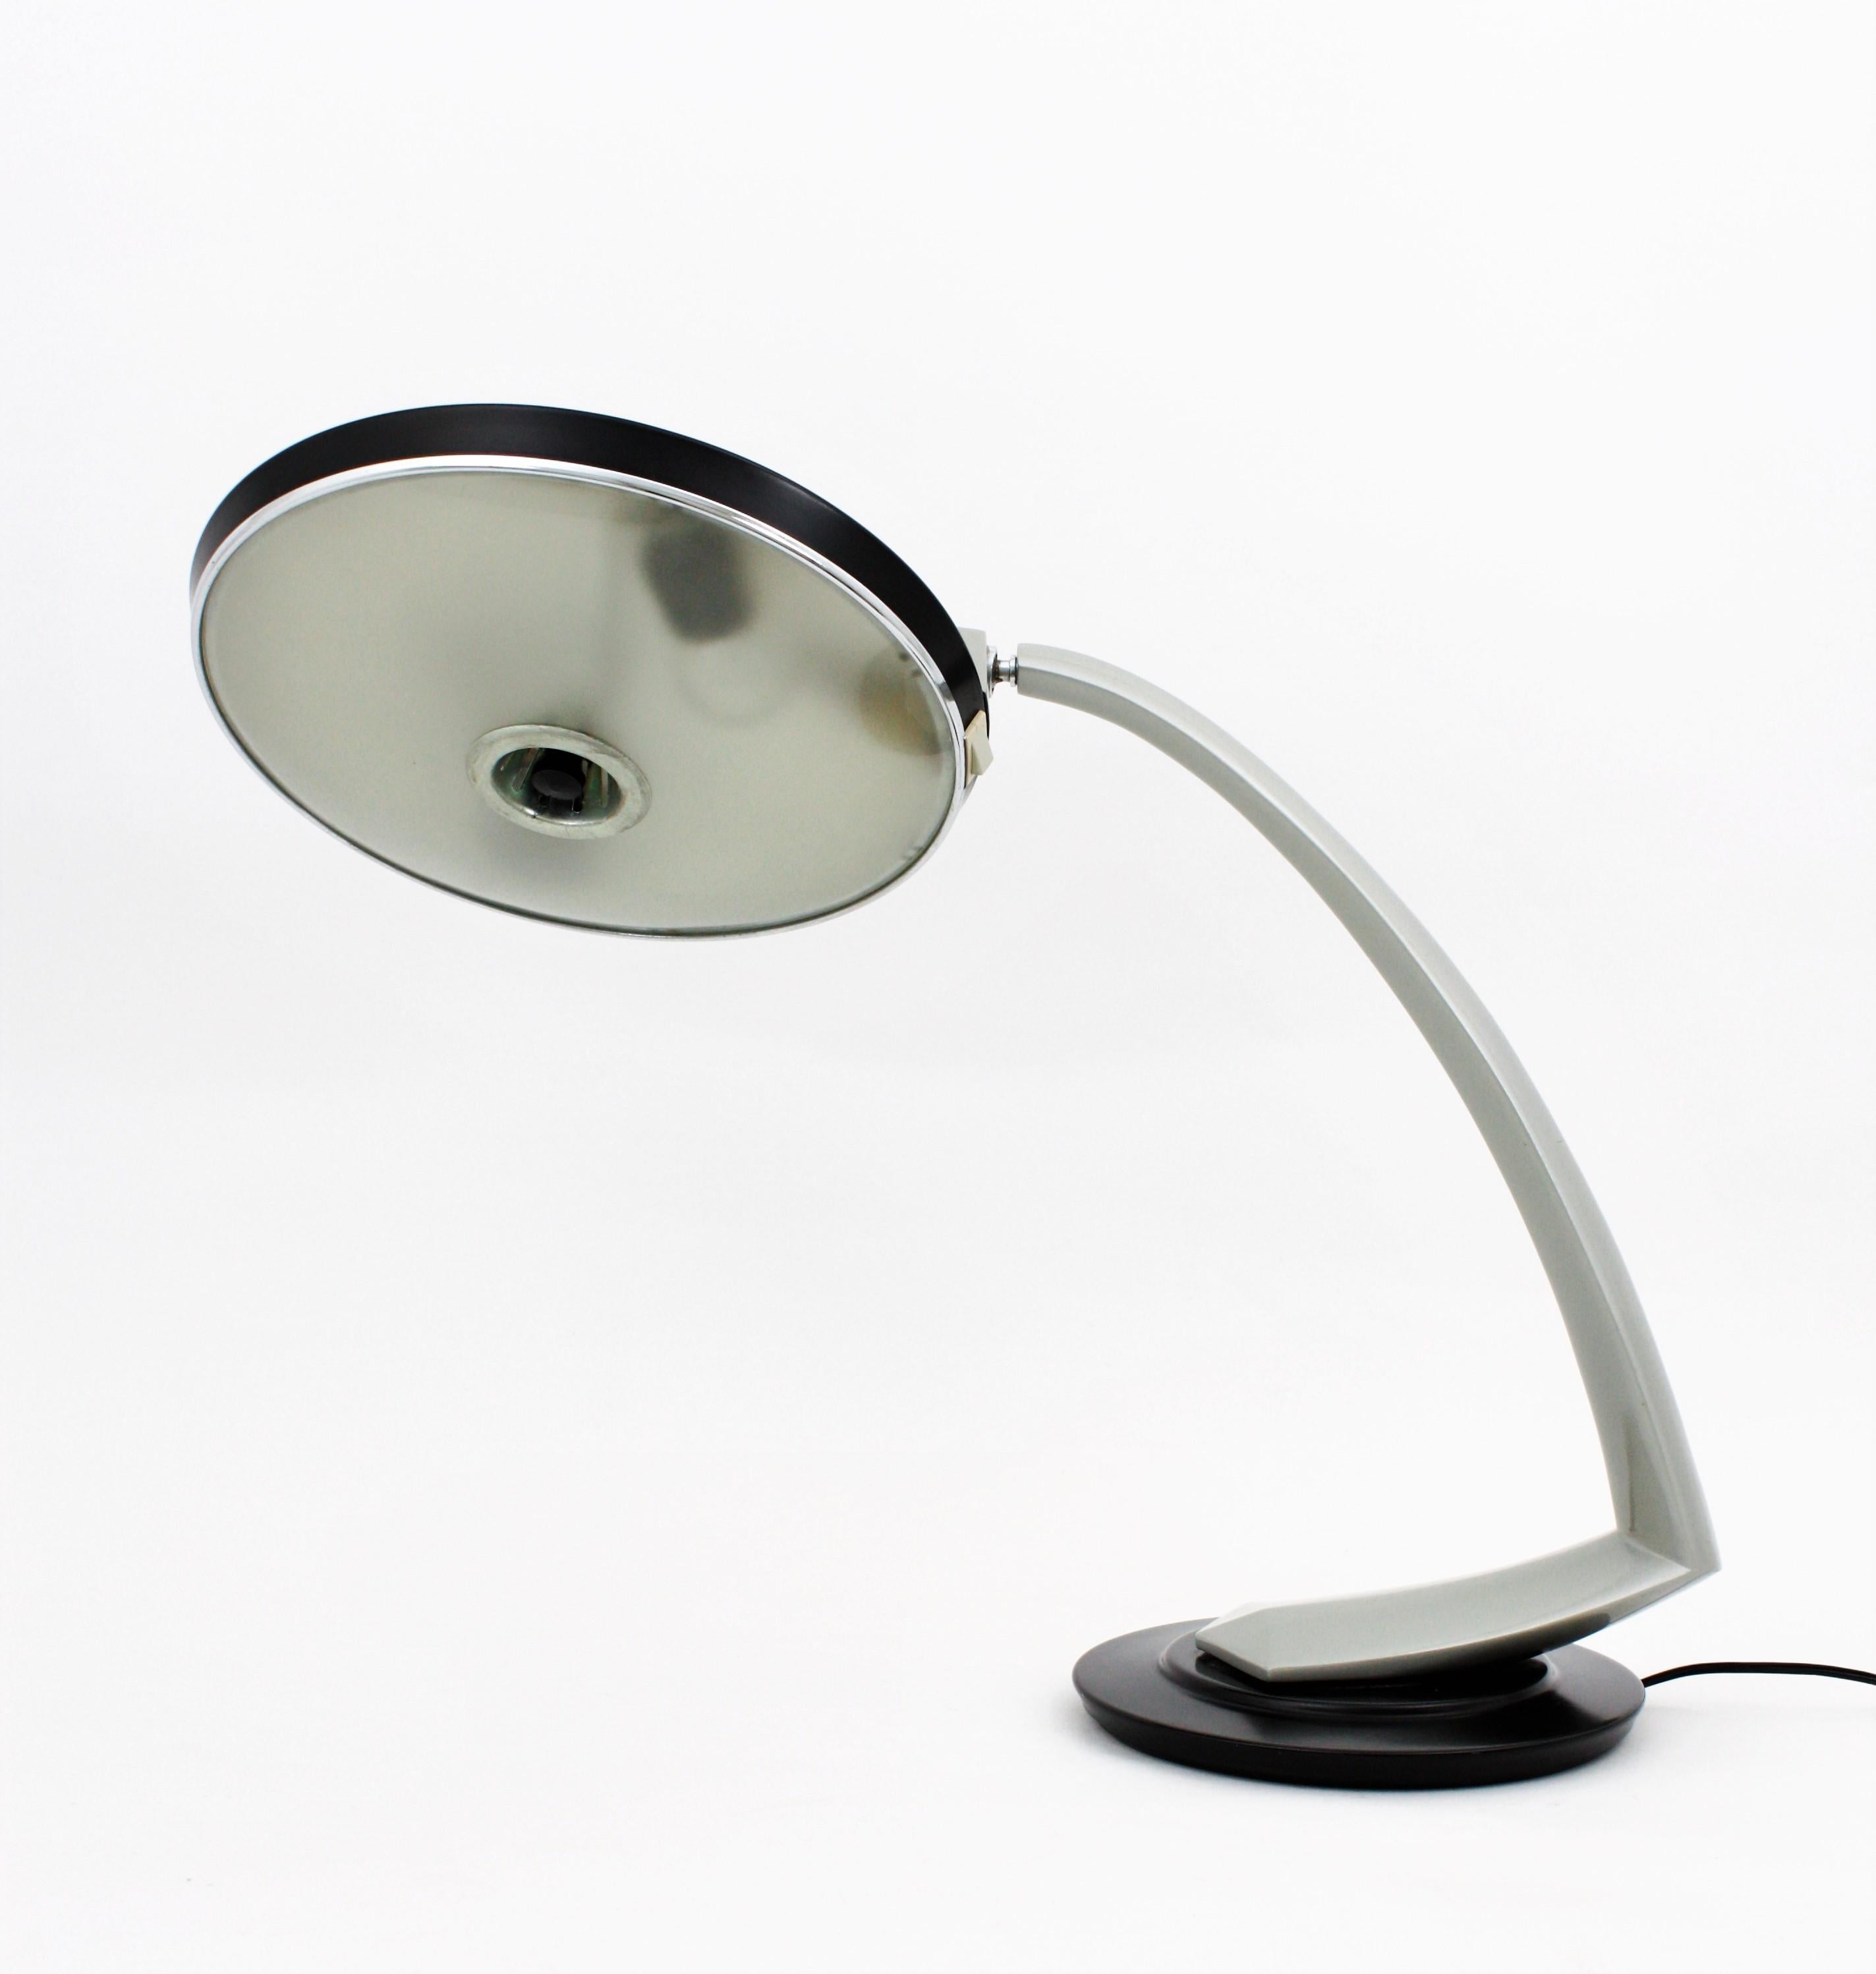 Glass Fase Boomerang 2000 Black and Grey Table Lamp, 1960s For Sale